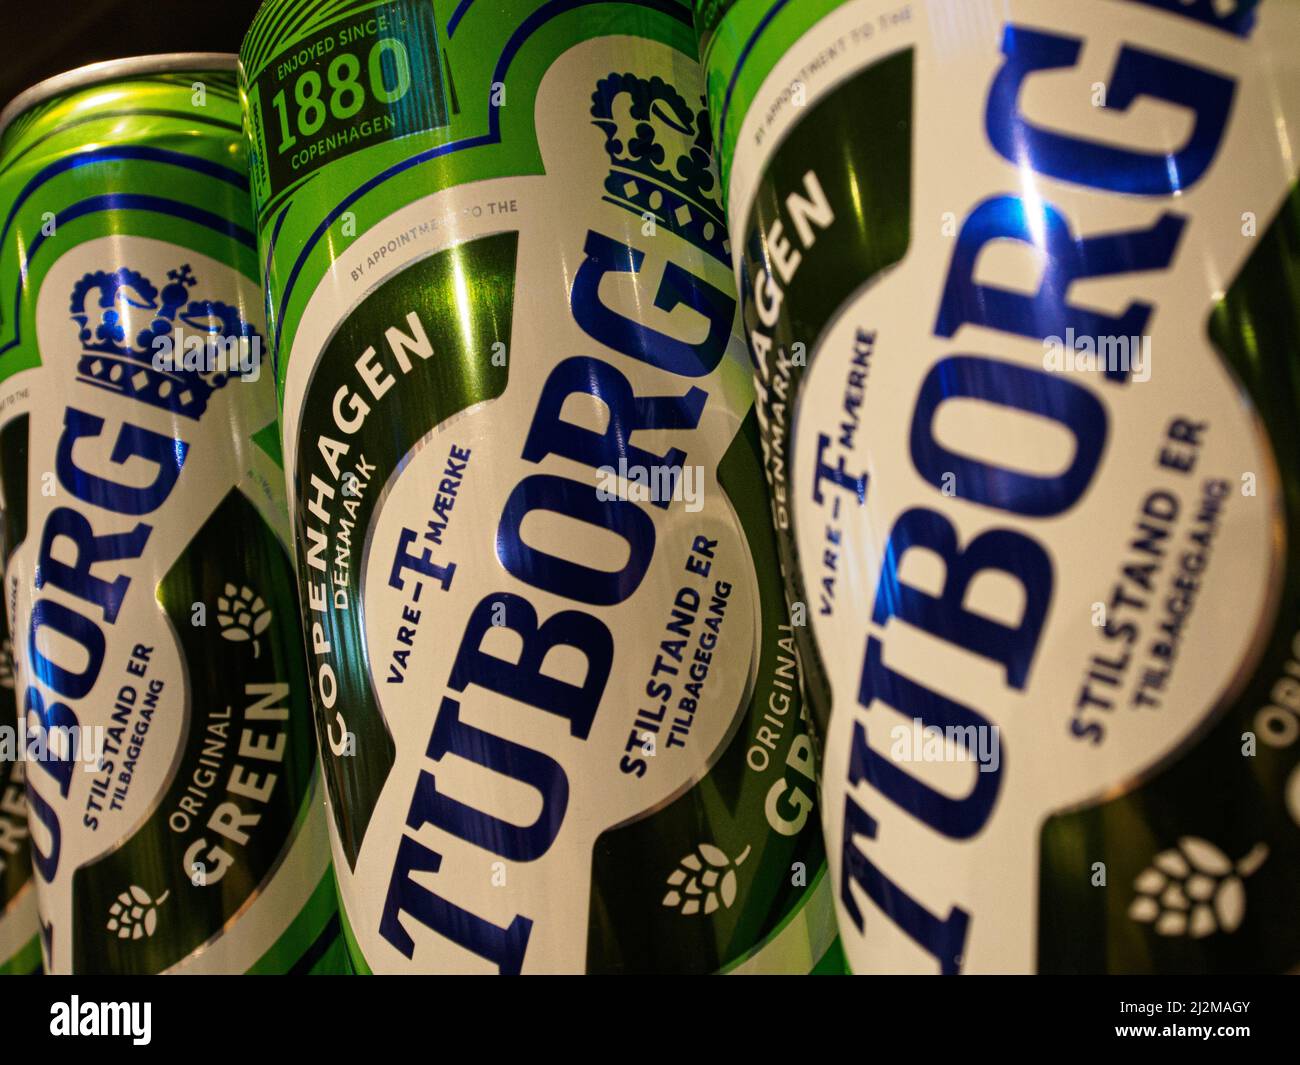 Tuborg beer cans on the supermarket shelf. It was reported that Carlsberg Group is leaving the Russian market and plans to transfer the local business to a new investor. The Danish brewing company 'Carlsberg' is represented in Russia by the brands 'Carlsberg', 'Kronenbourg', 'Holsten' and 'Tuborg' Stock Photo